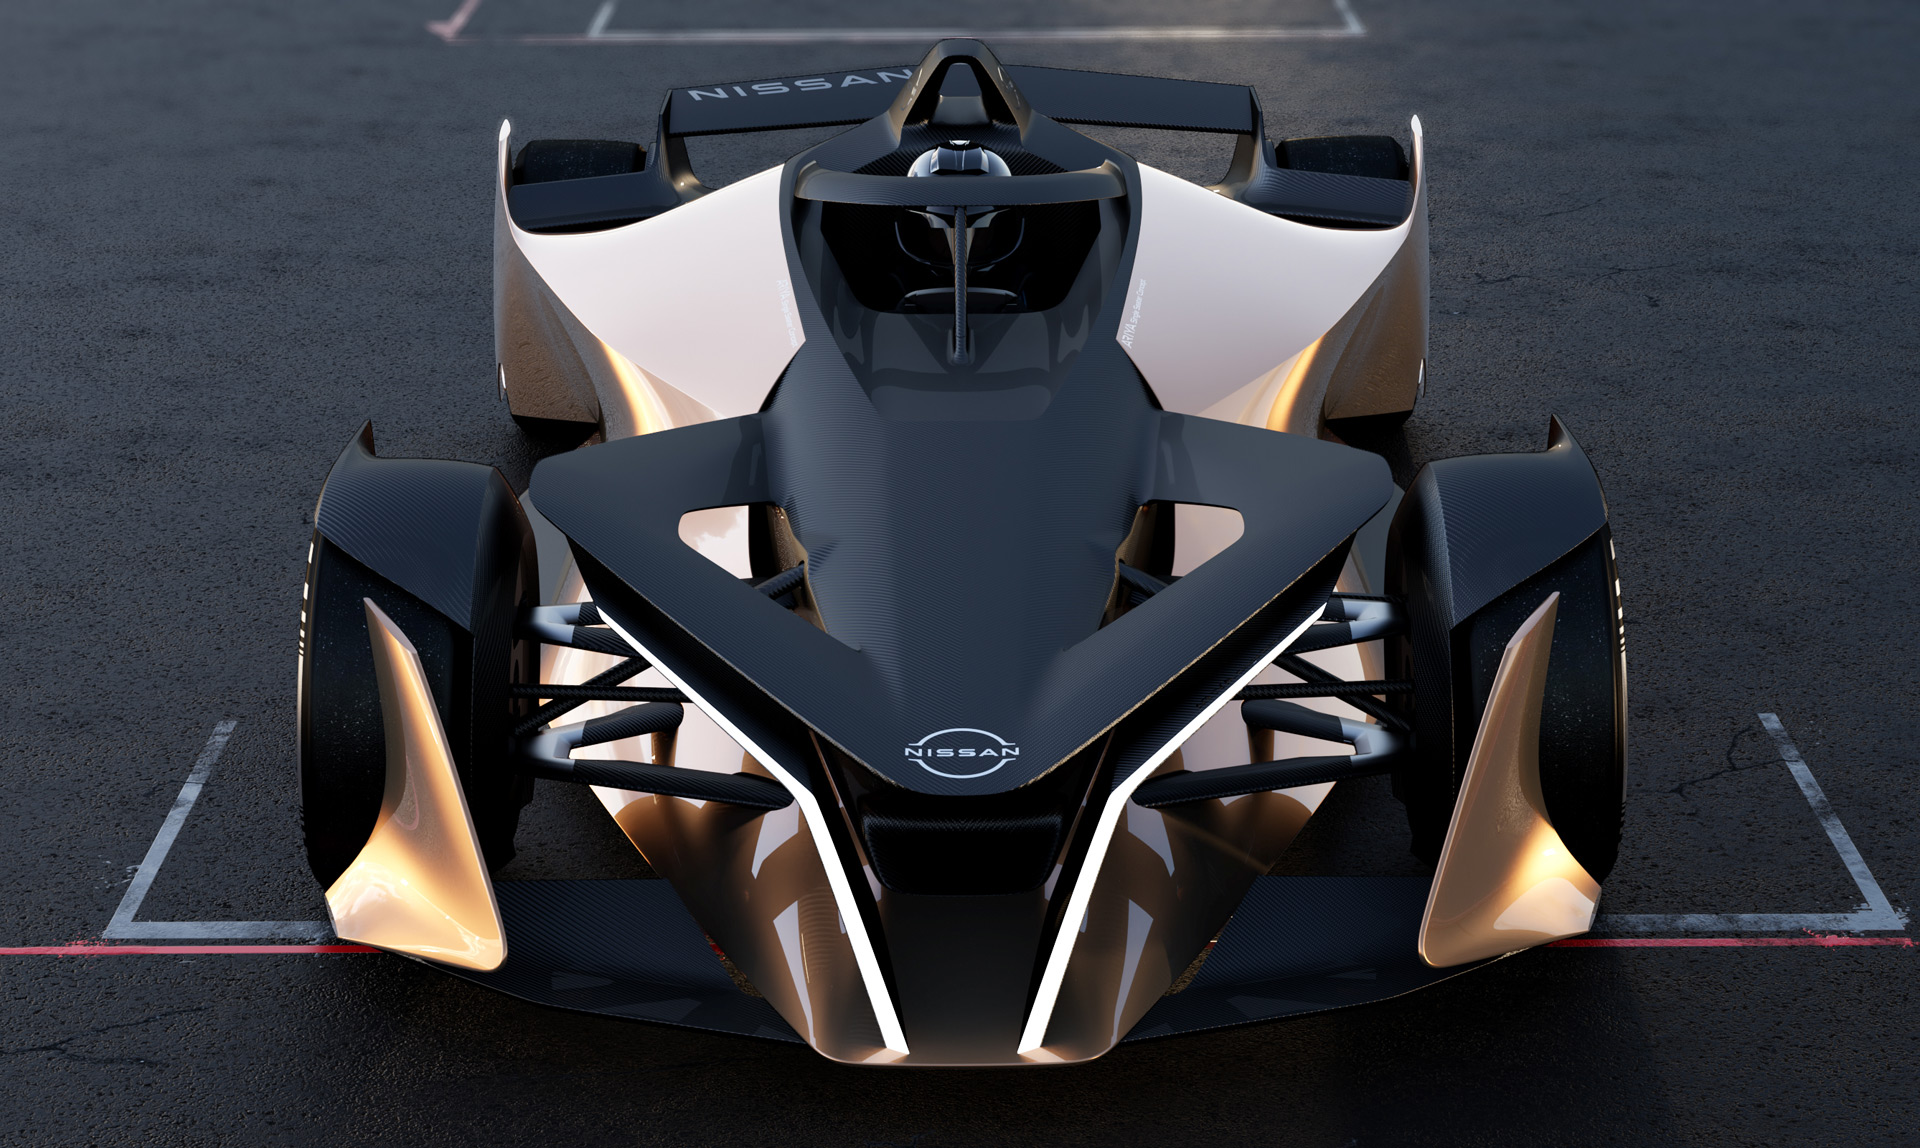 Nissan concept translates Ariya electric crossover's performance to a single-seat race carNissan concept translates Ariya electric crossover's performance to a single-seat race car